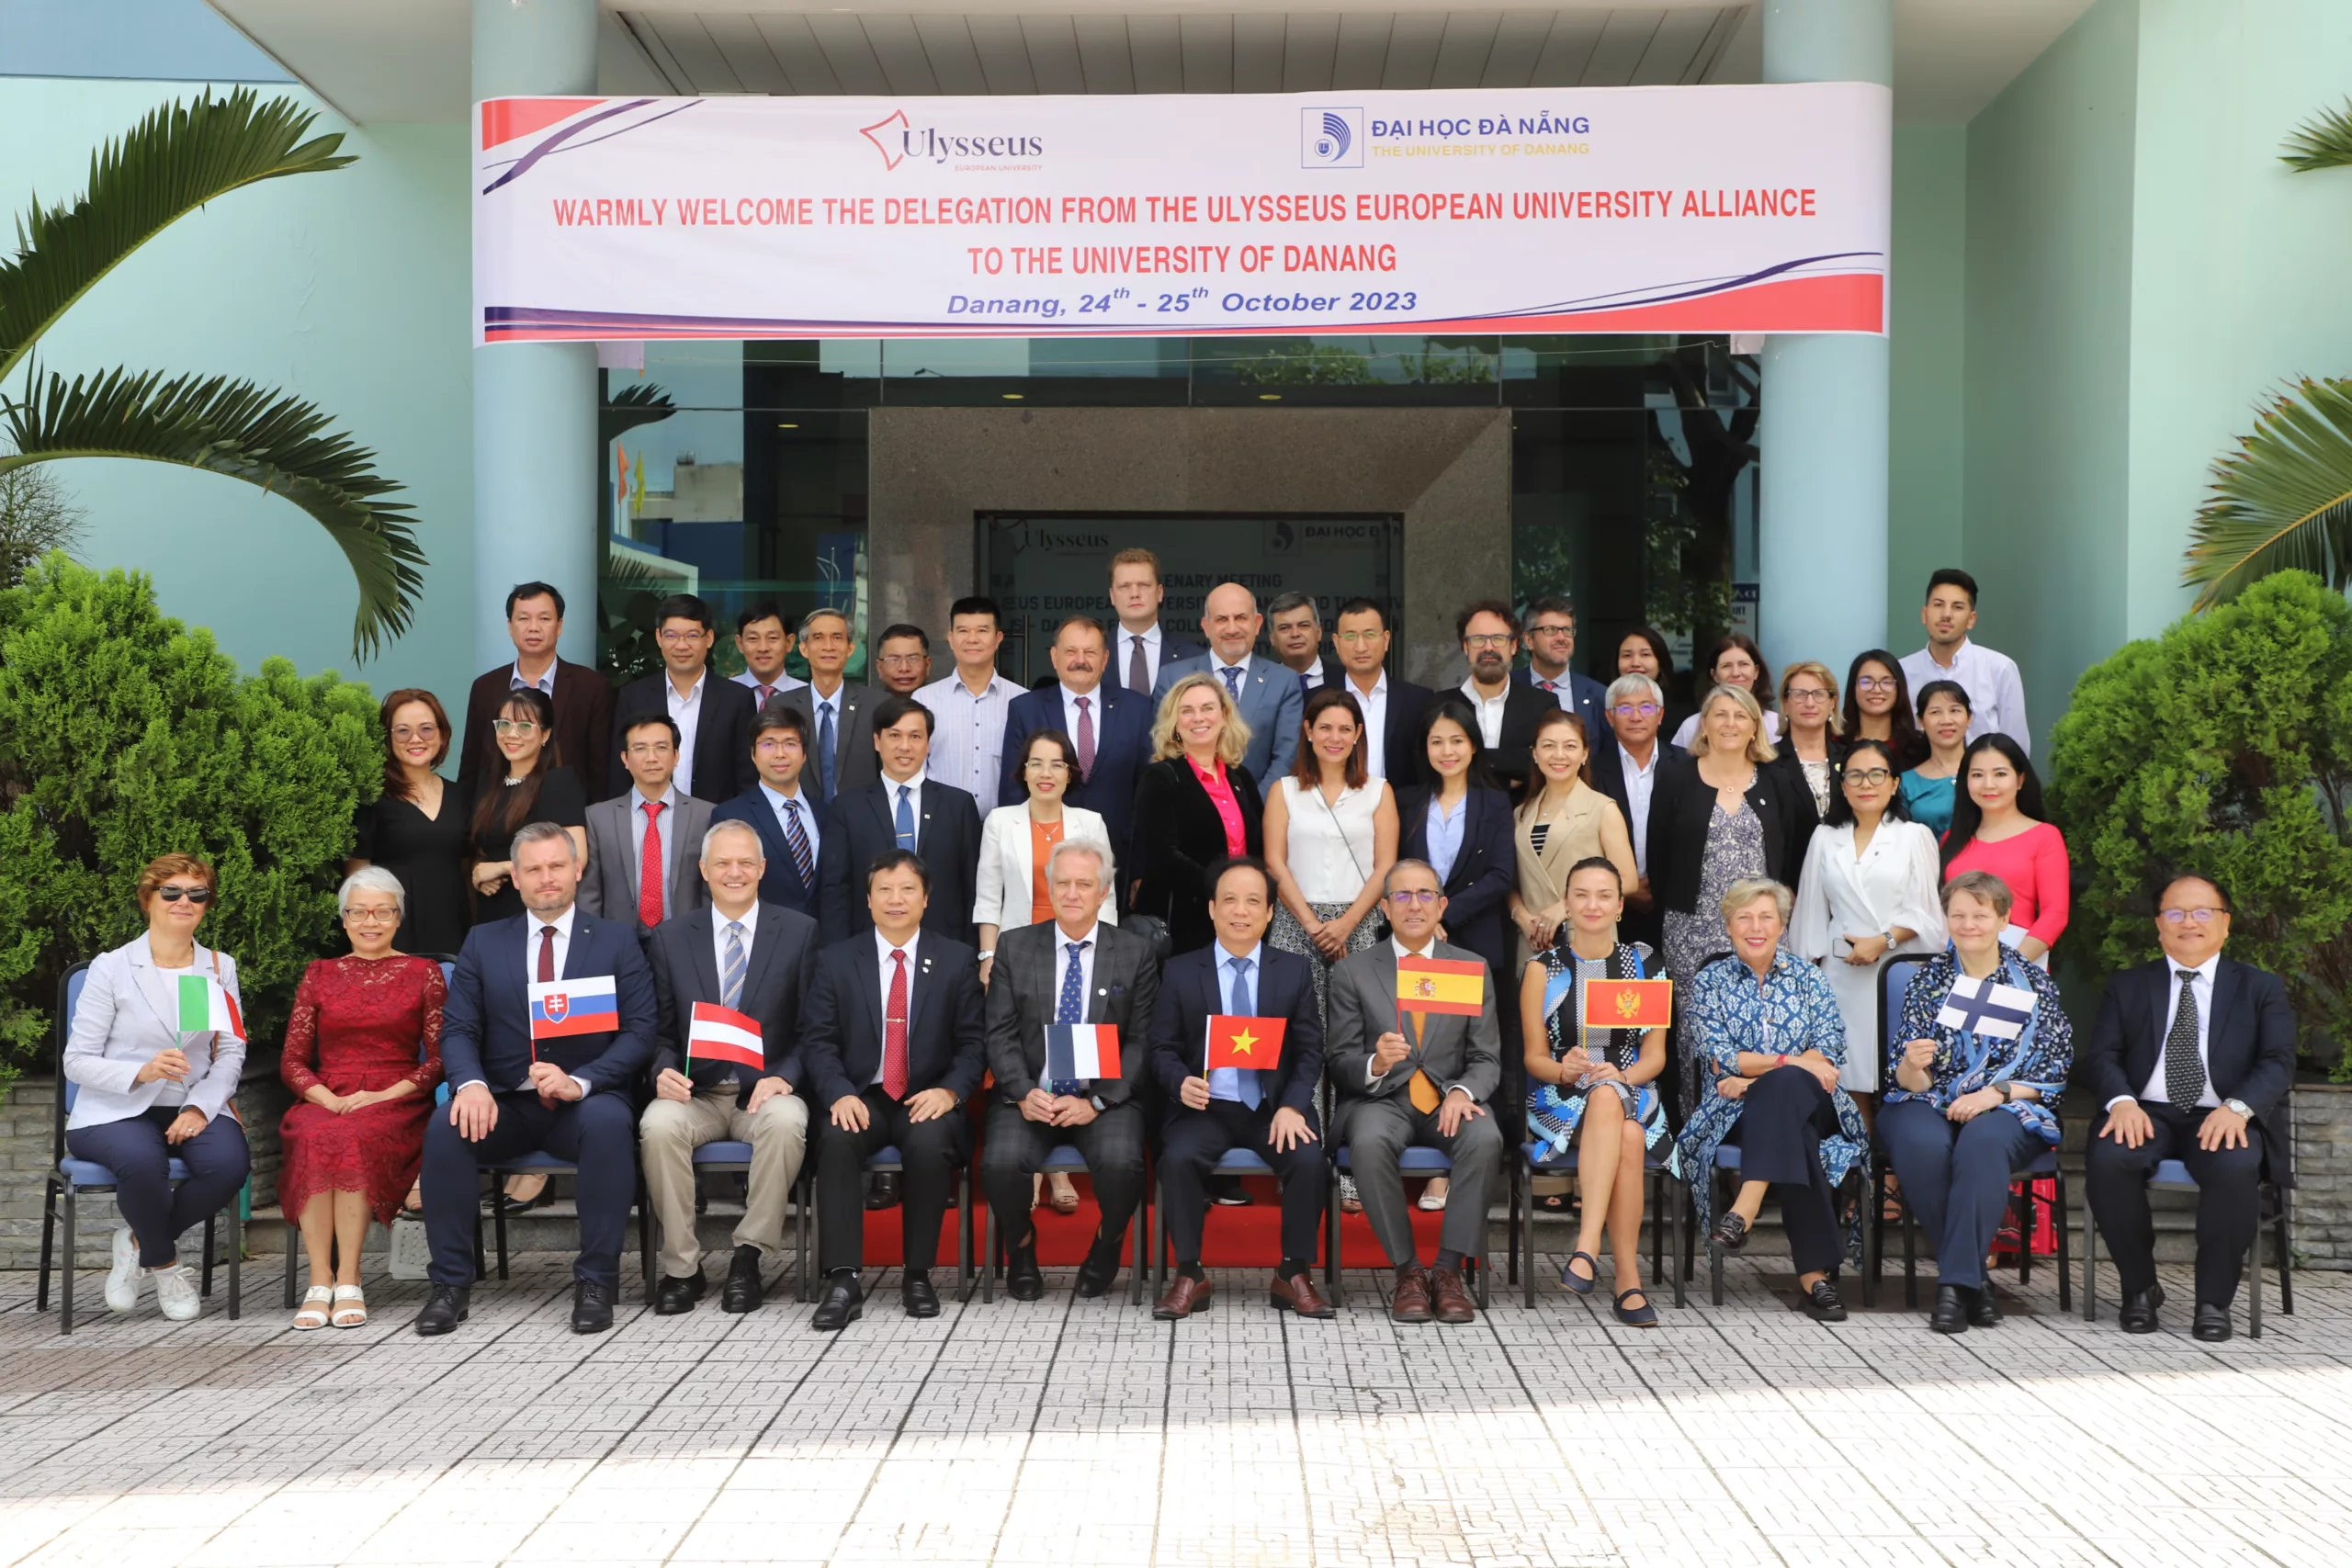 Ulysseus-Da Nang Education, Research and Innovation Forum for Smart Cities